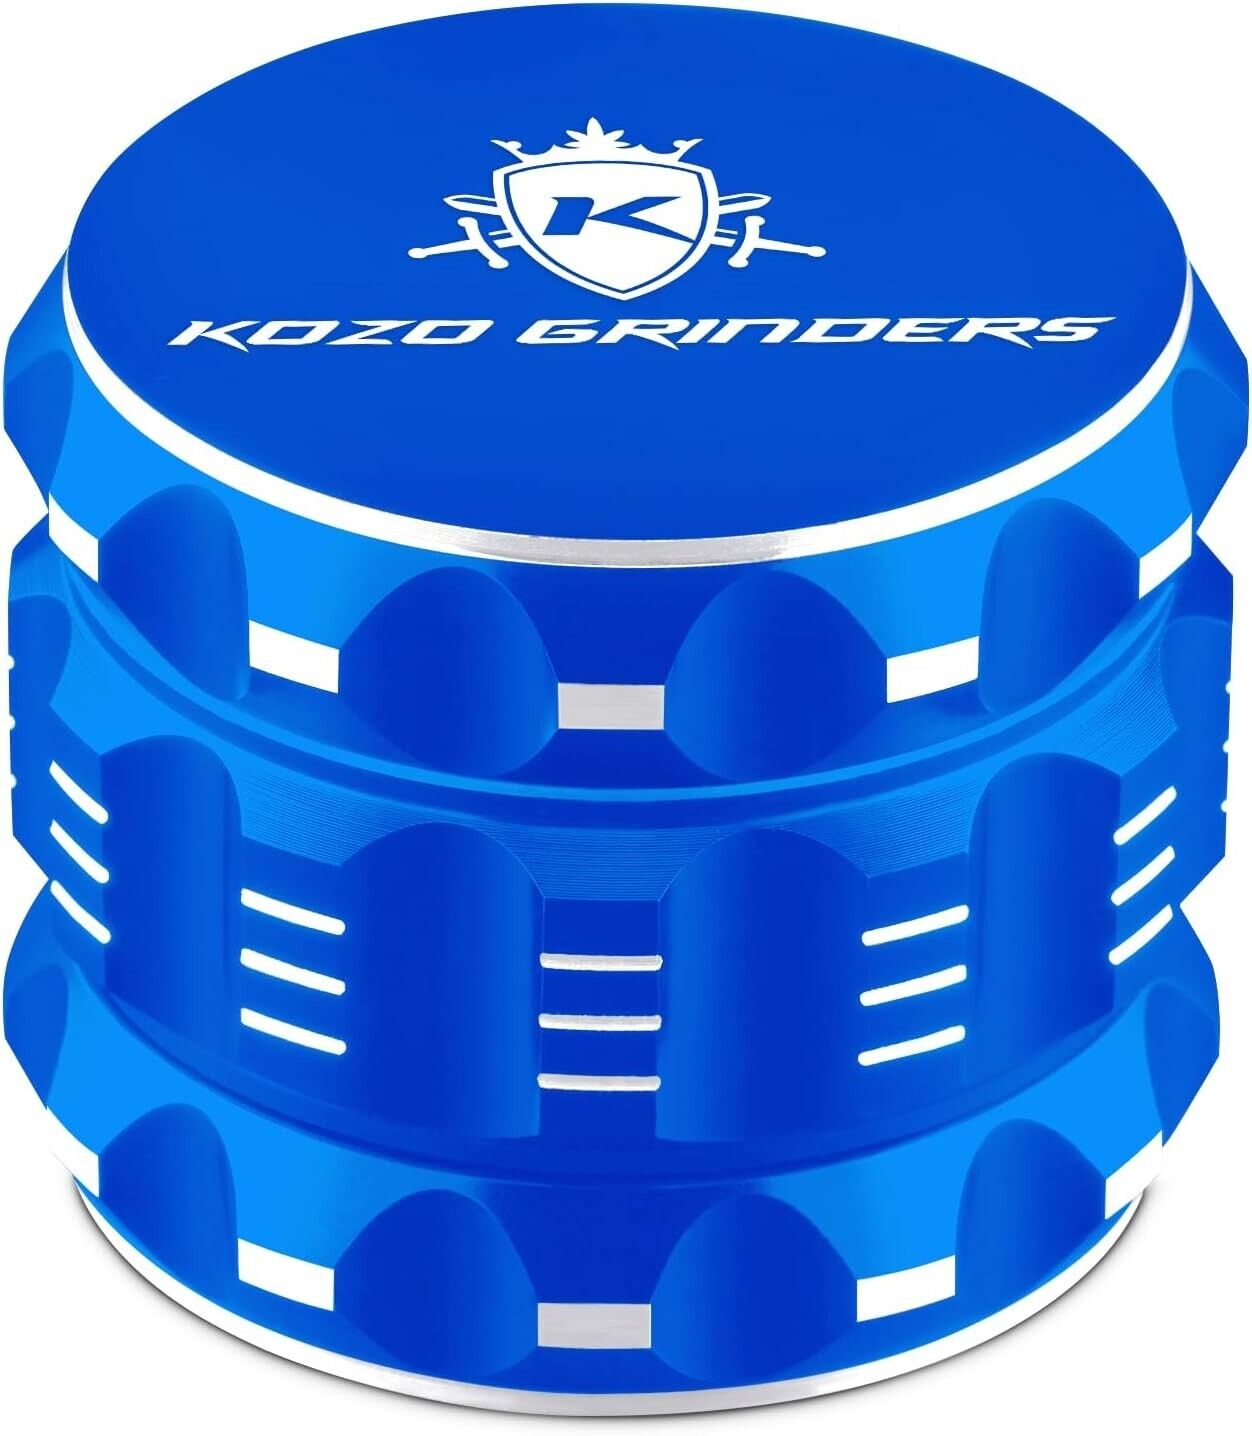 Kozo Grinders Best Herb Grinder Large 4 Piece, 2.5in Blue Anodized Aluminum